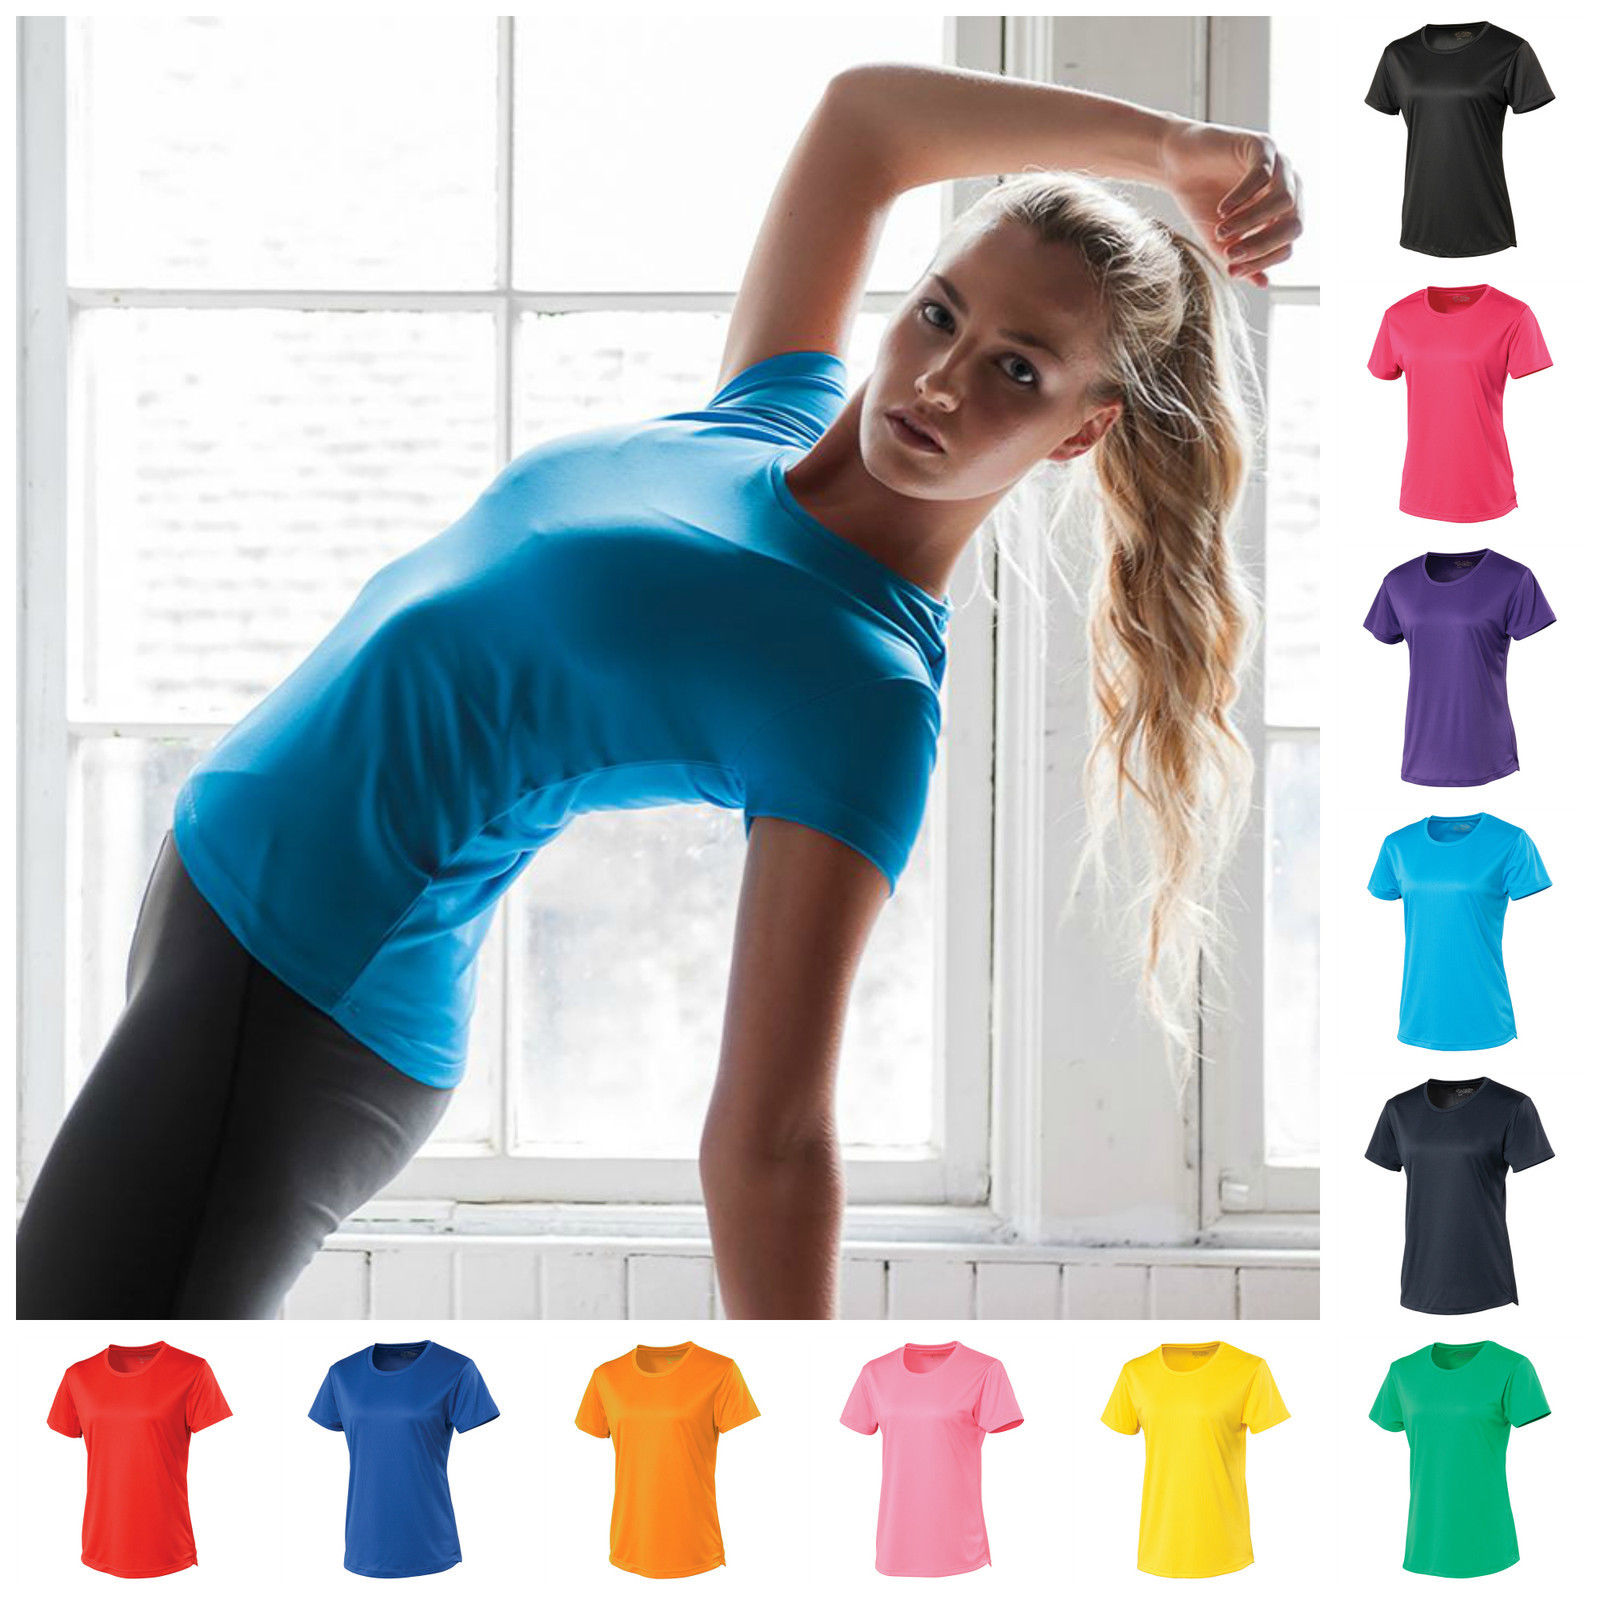 Ladies Fitness Running Short Sleeve T Shirt Tee Top Gym Sports Yoga Breathable